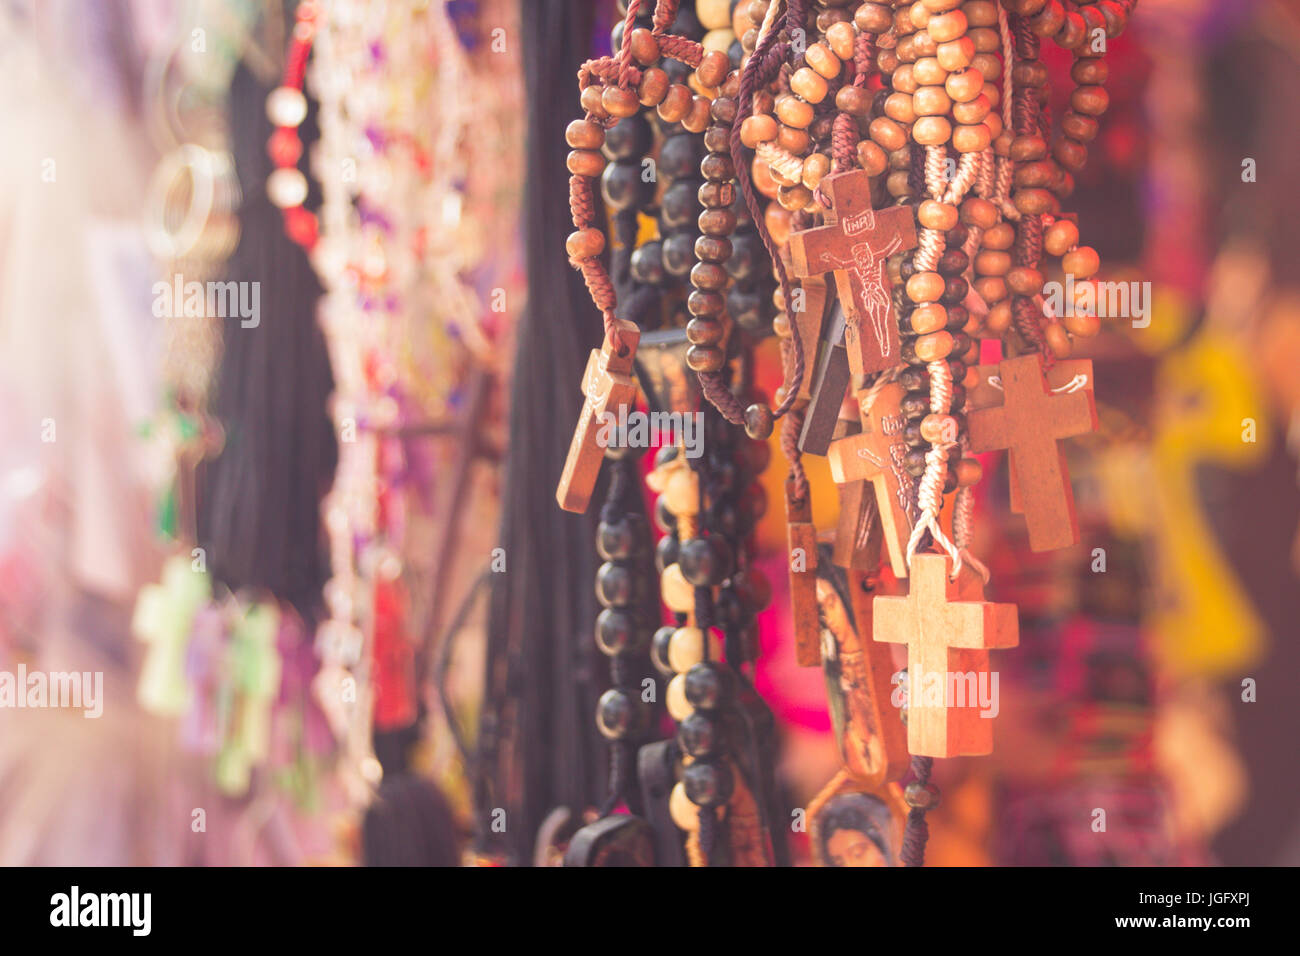 Photograph of some religious Rosaries at a market Stock Photo